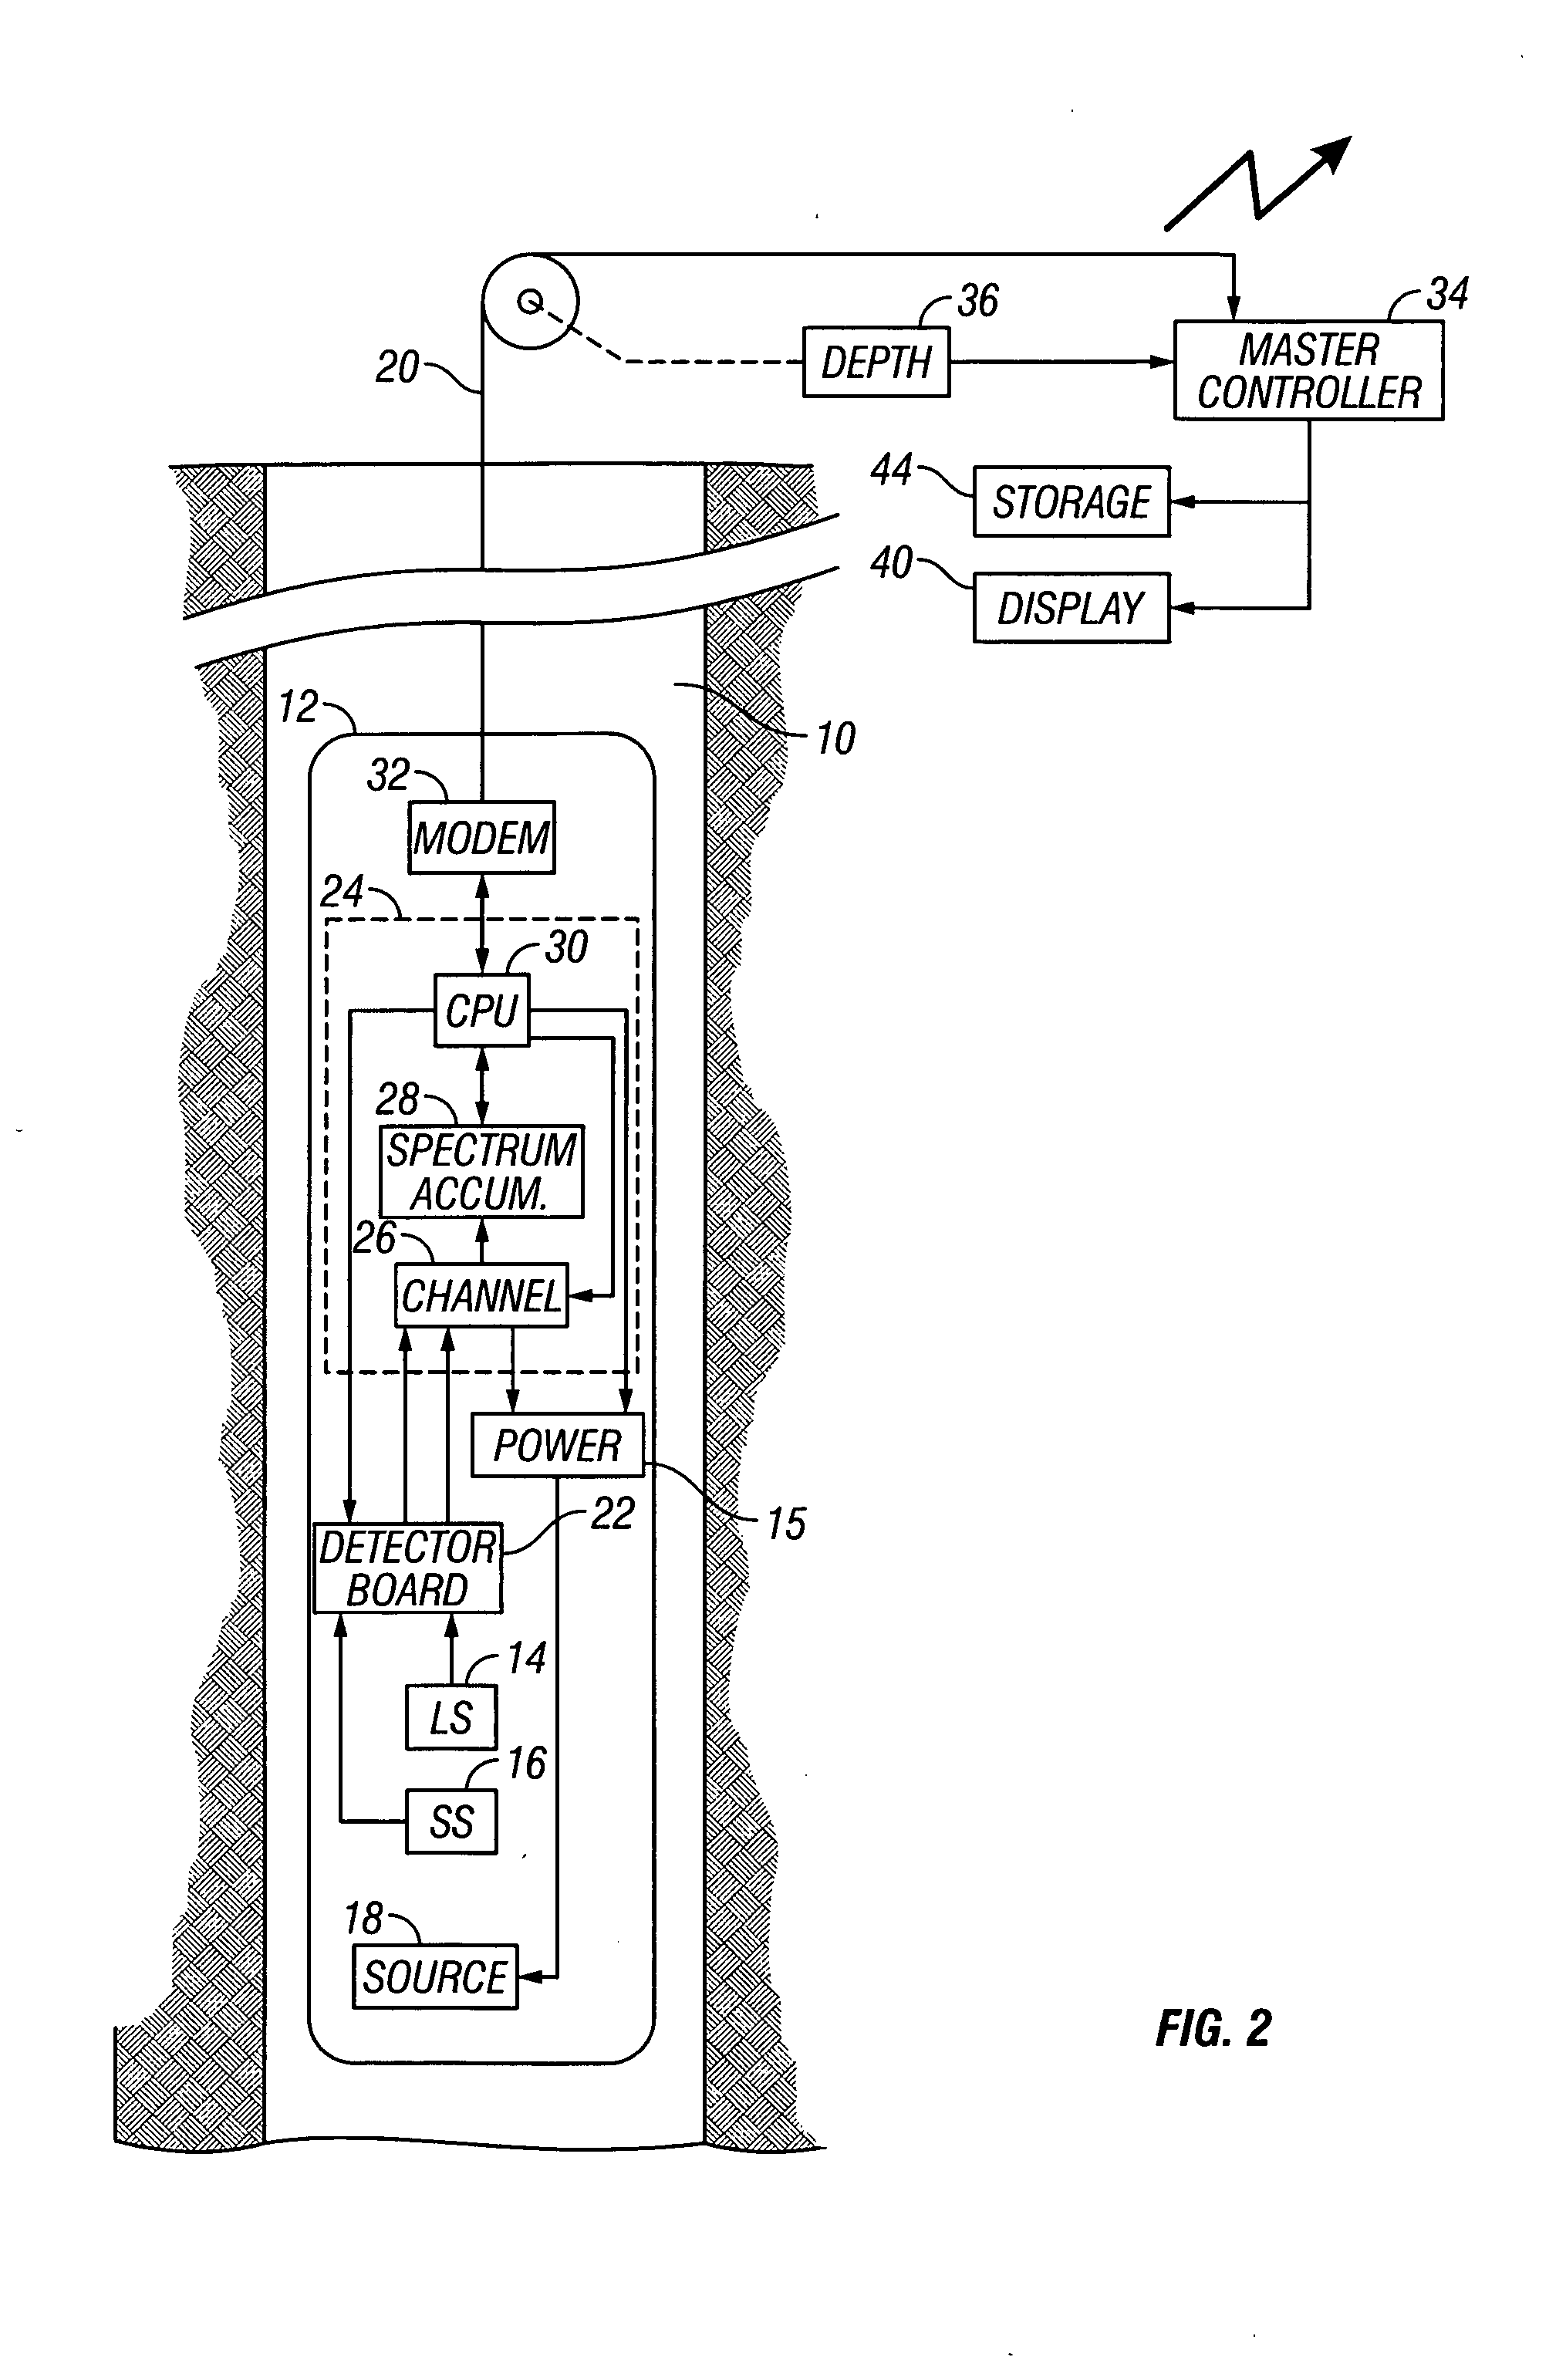 Apparatus and method for determining thermal neutron capture cross section of a subsurface formation from a borehole using multiple detectors